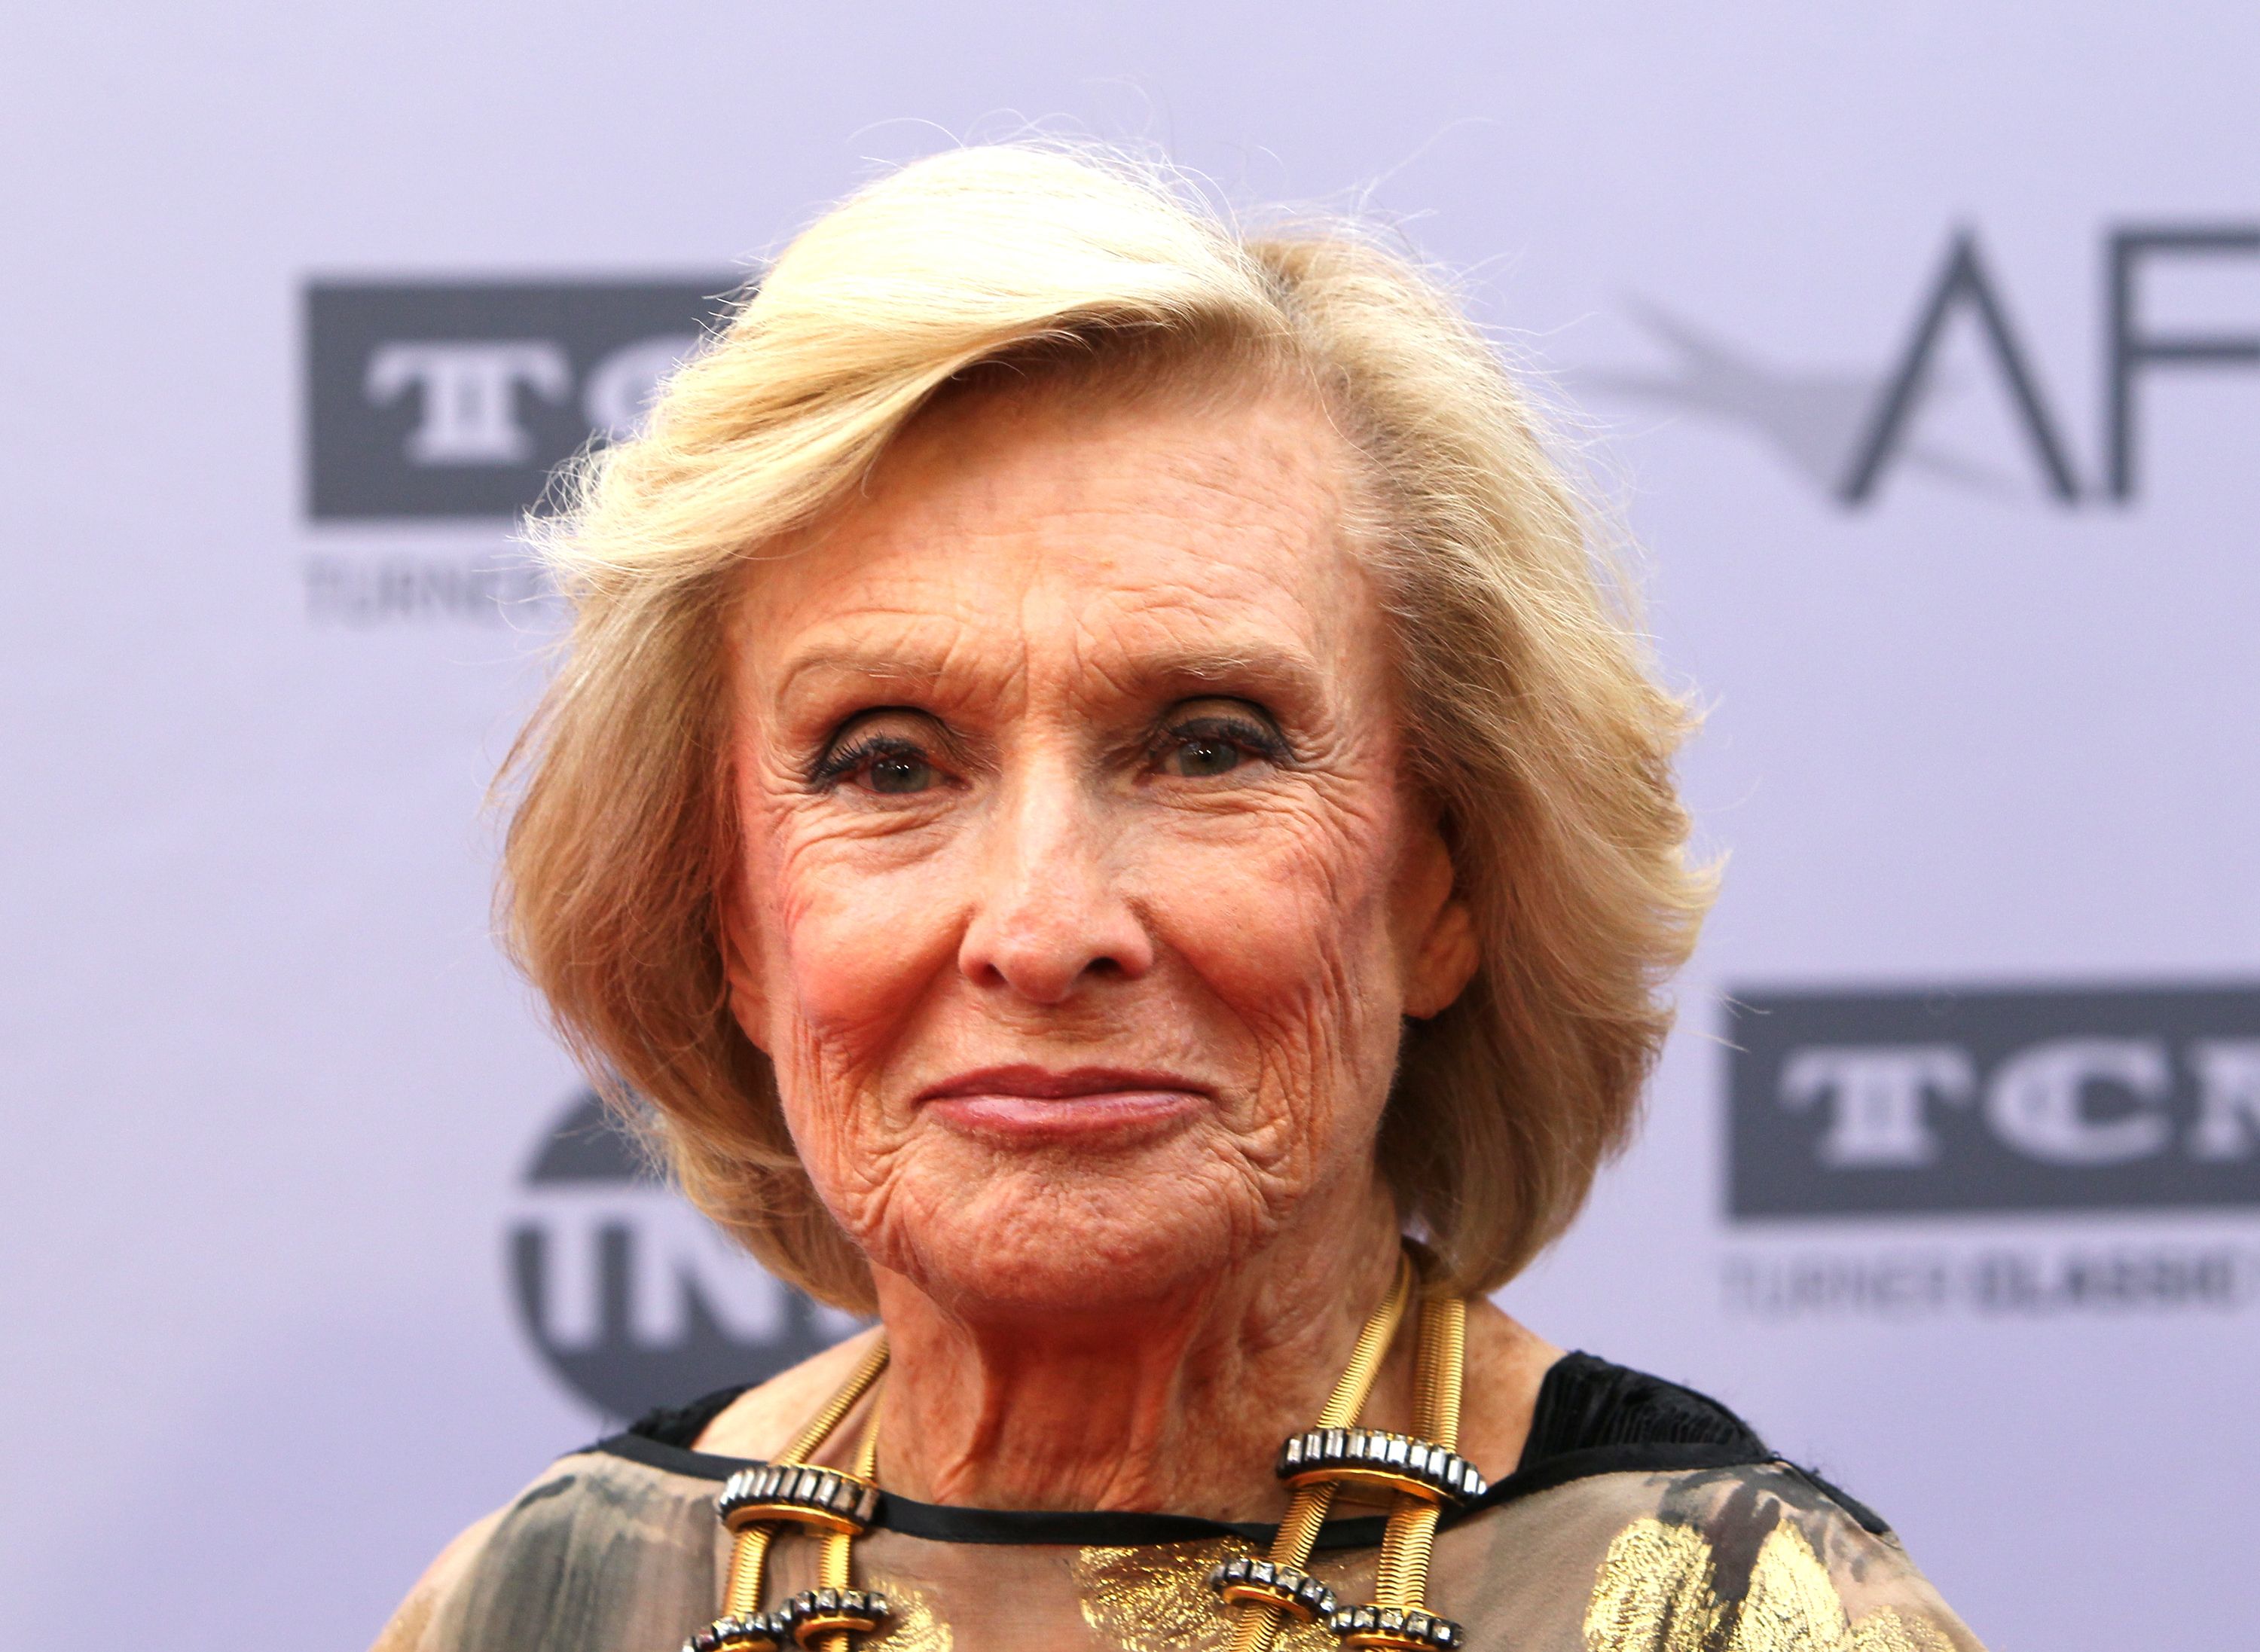 Of leachman pictures cloris A Look